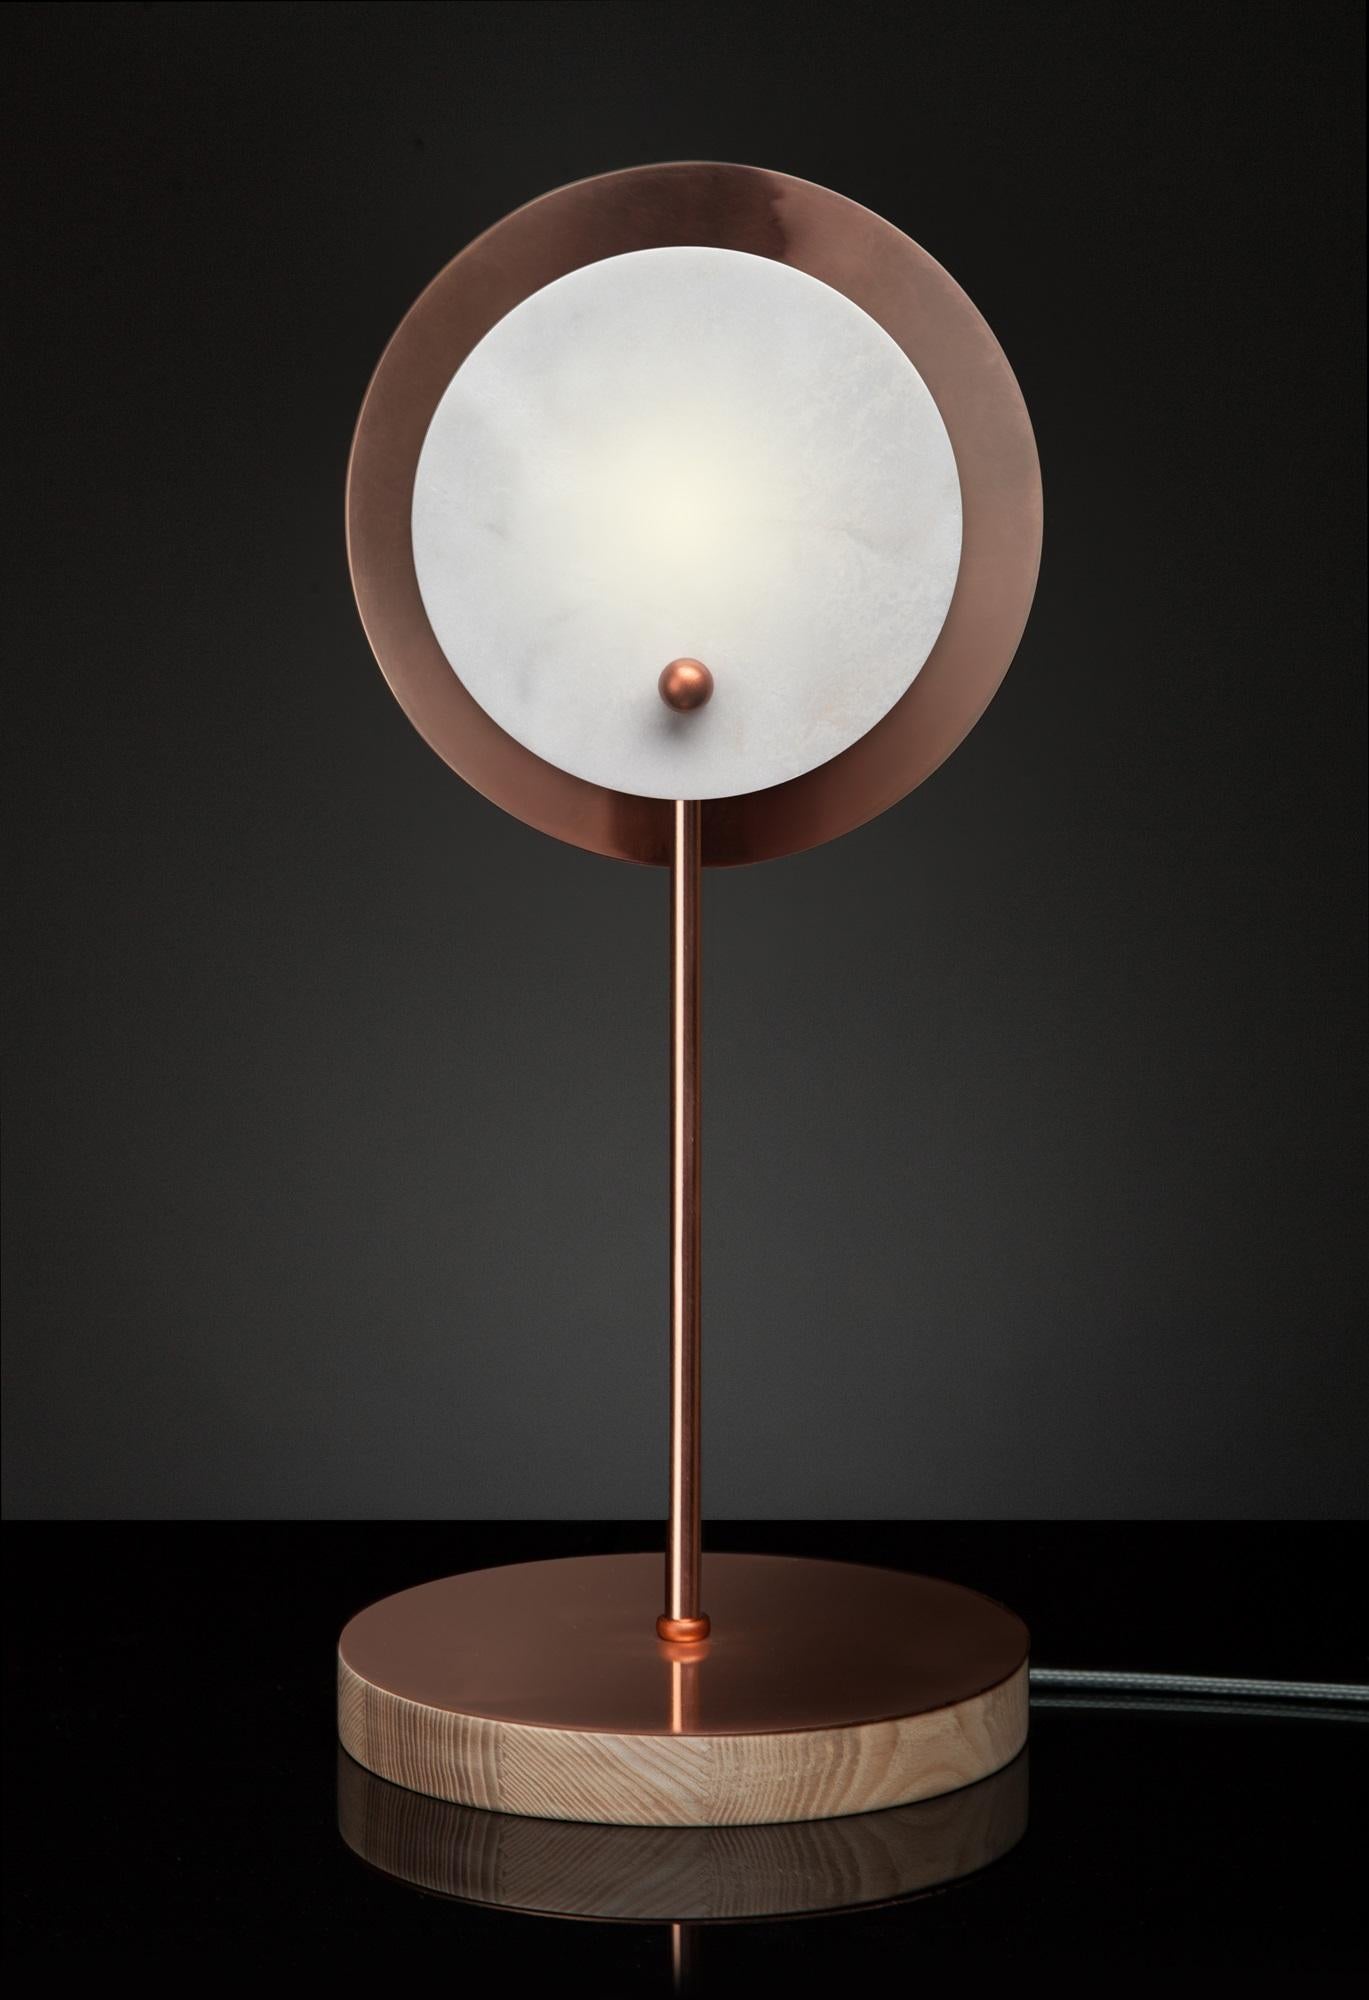 Hand-sculpted onyx table lamp, Stoned Sun
Materials: Copper sprayed polished stainless steel, onyx, ash 
Dimensions: 45 x 20 x 20 cm
Light: G9 LED bulb


SKELD Design is a contemporary design studio. 
We focus on interior lighting and